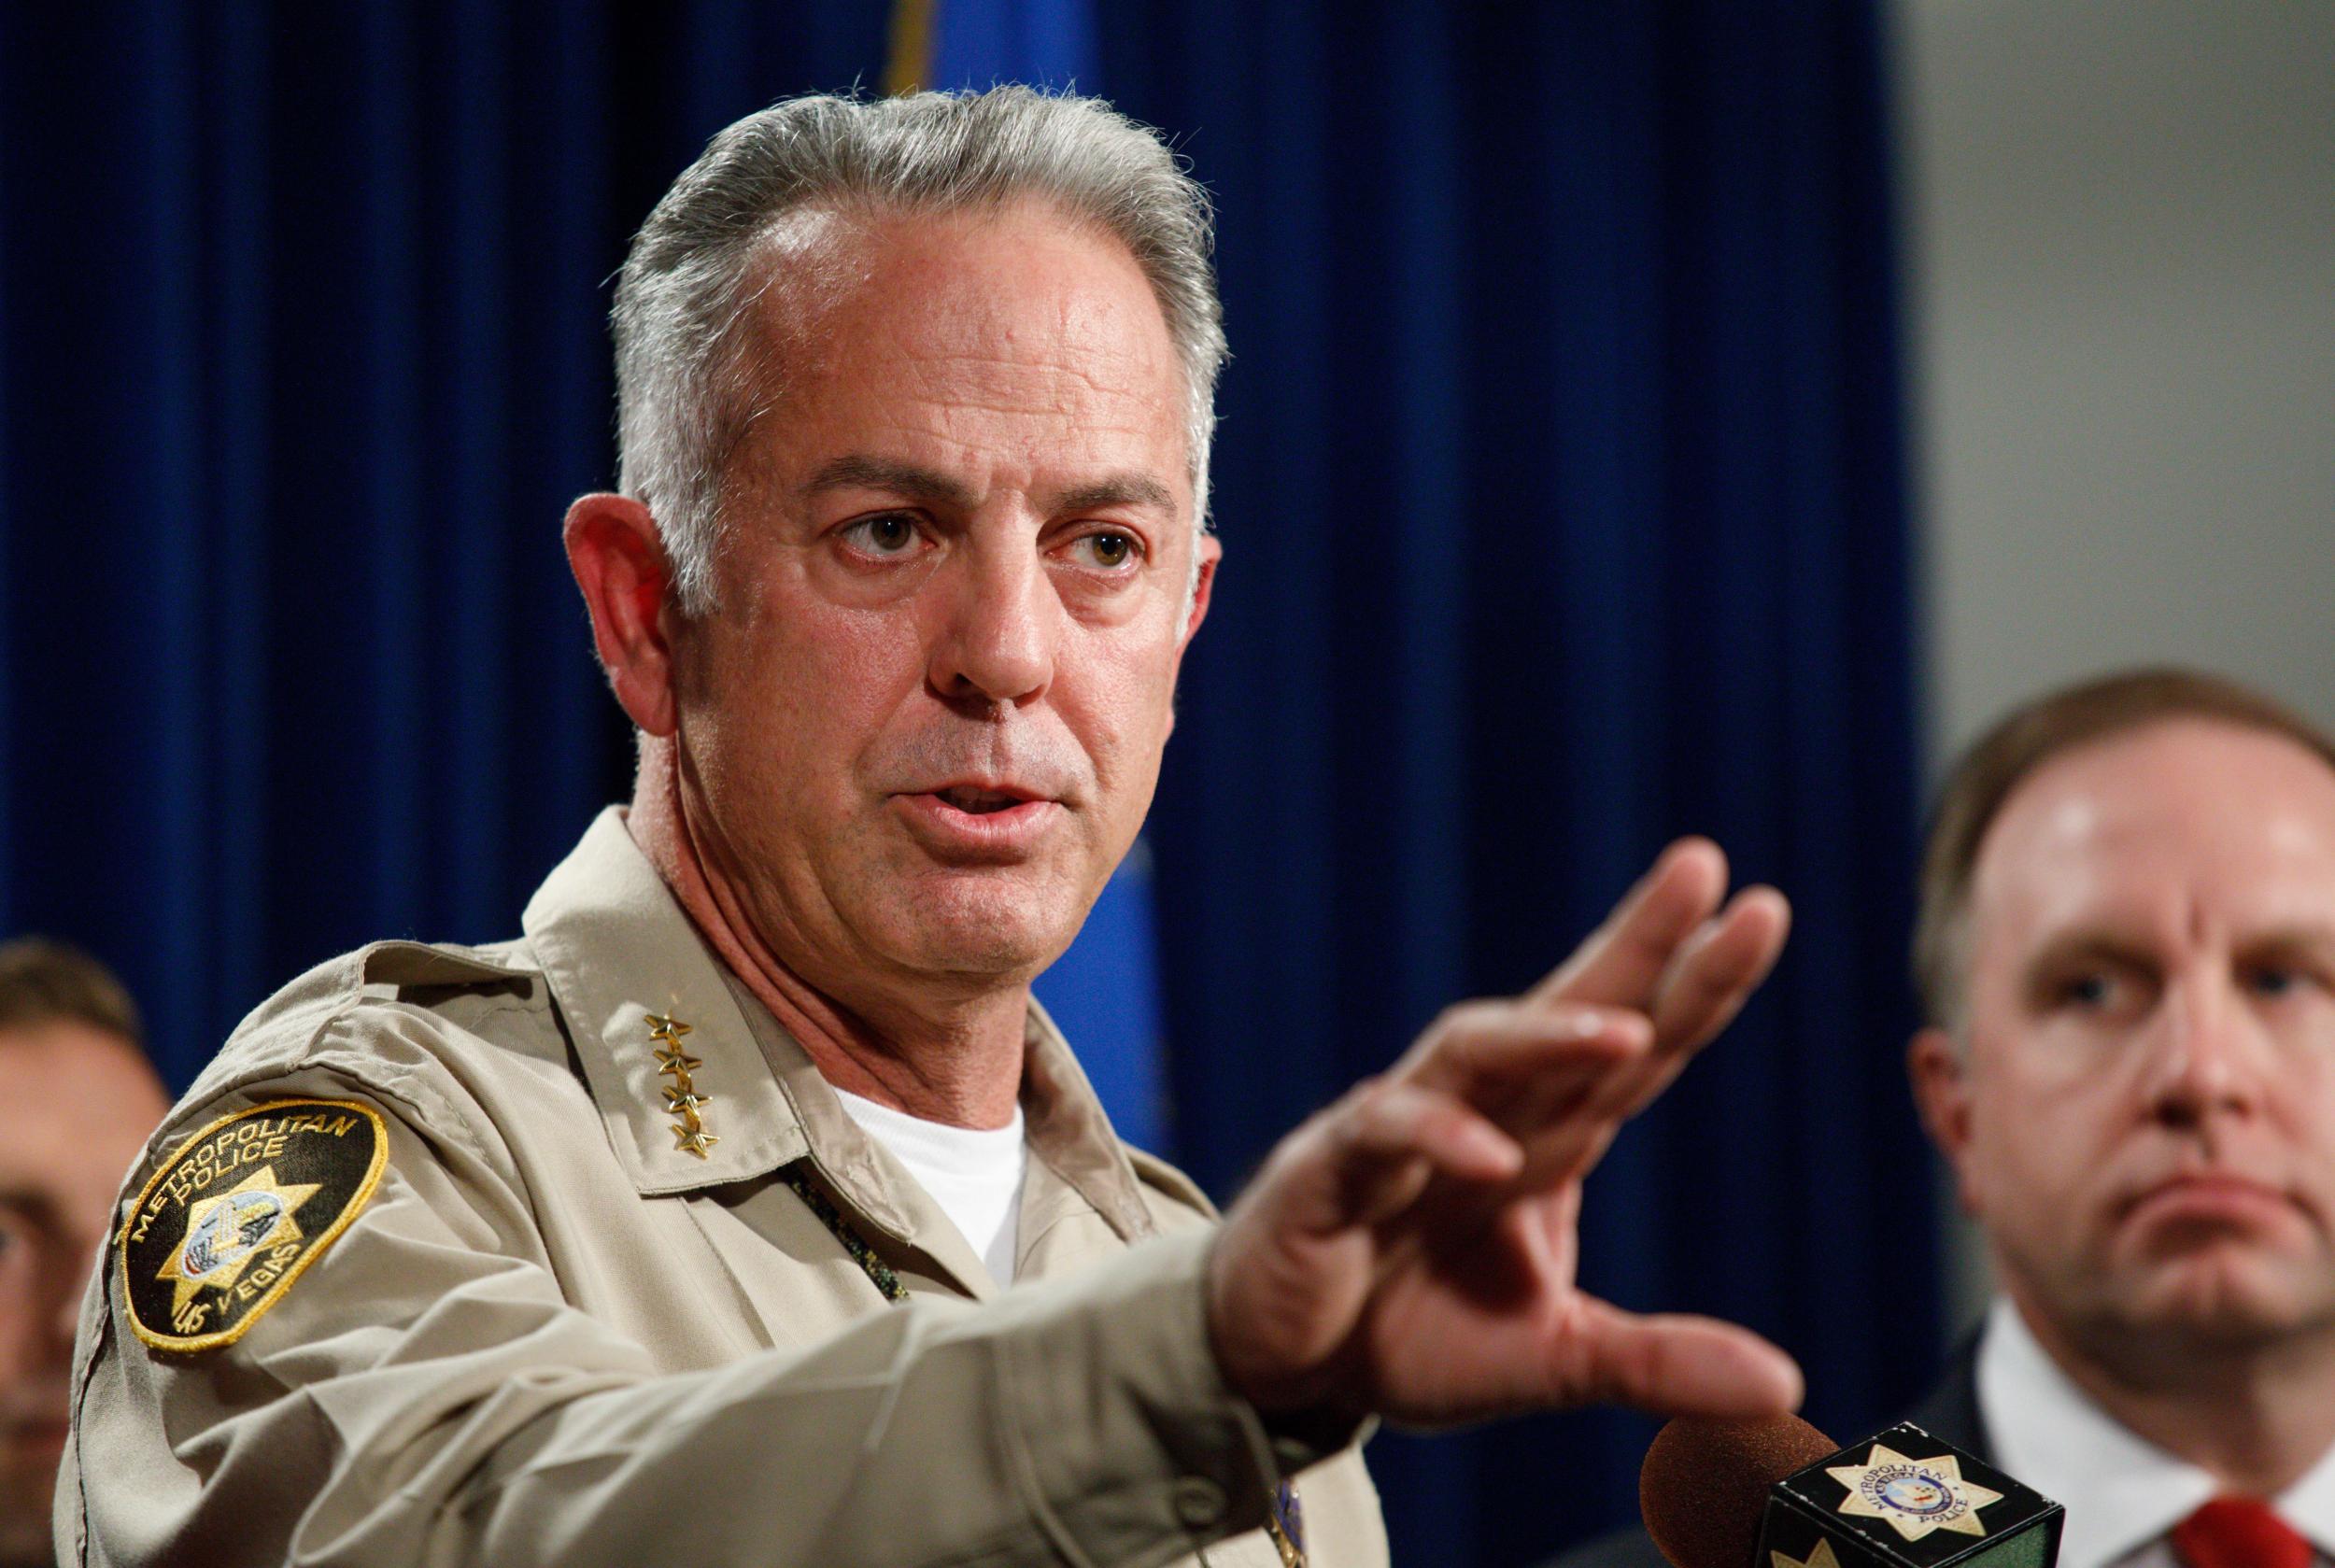 Las Vegas sheriff Joseph Lombardo speaks alongside FBI special agent Aaron Rouse during a press conference about their investigation